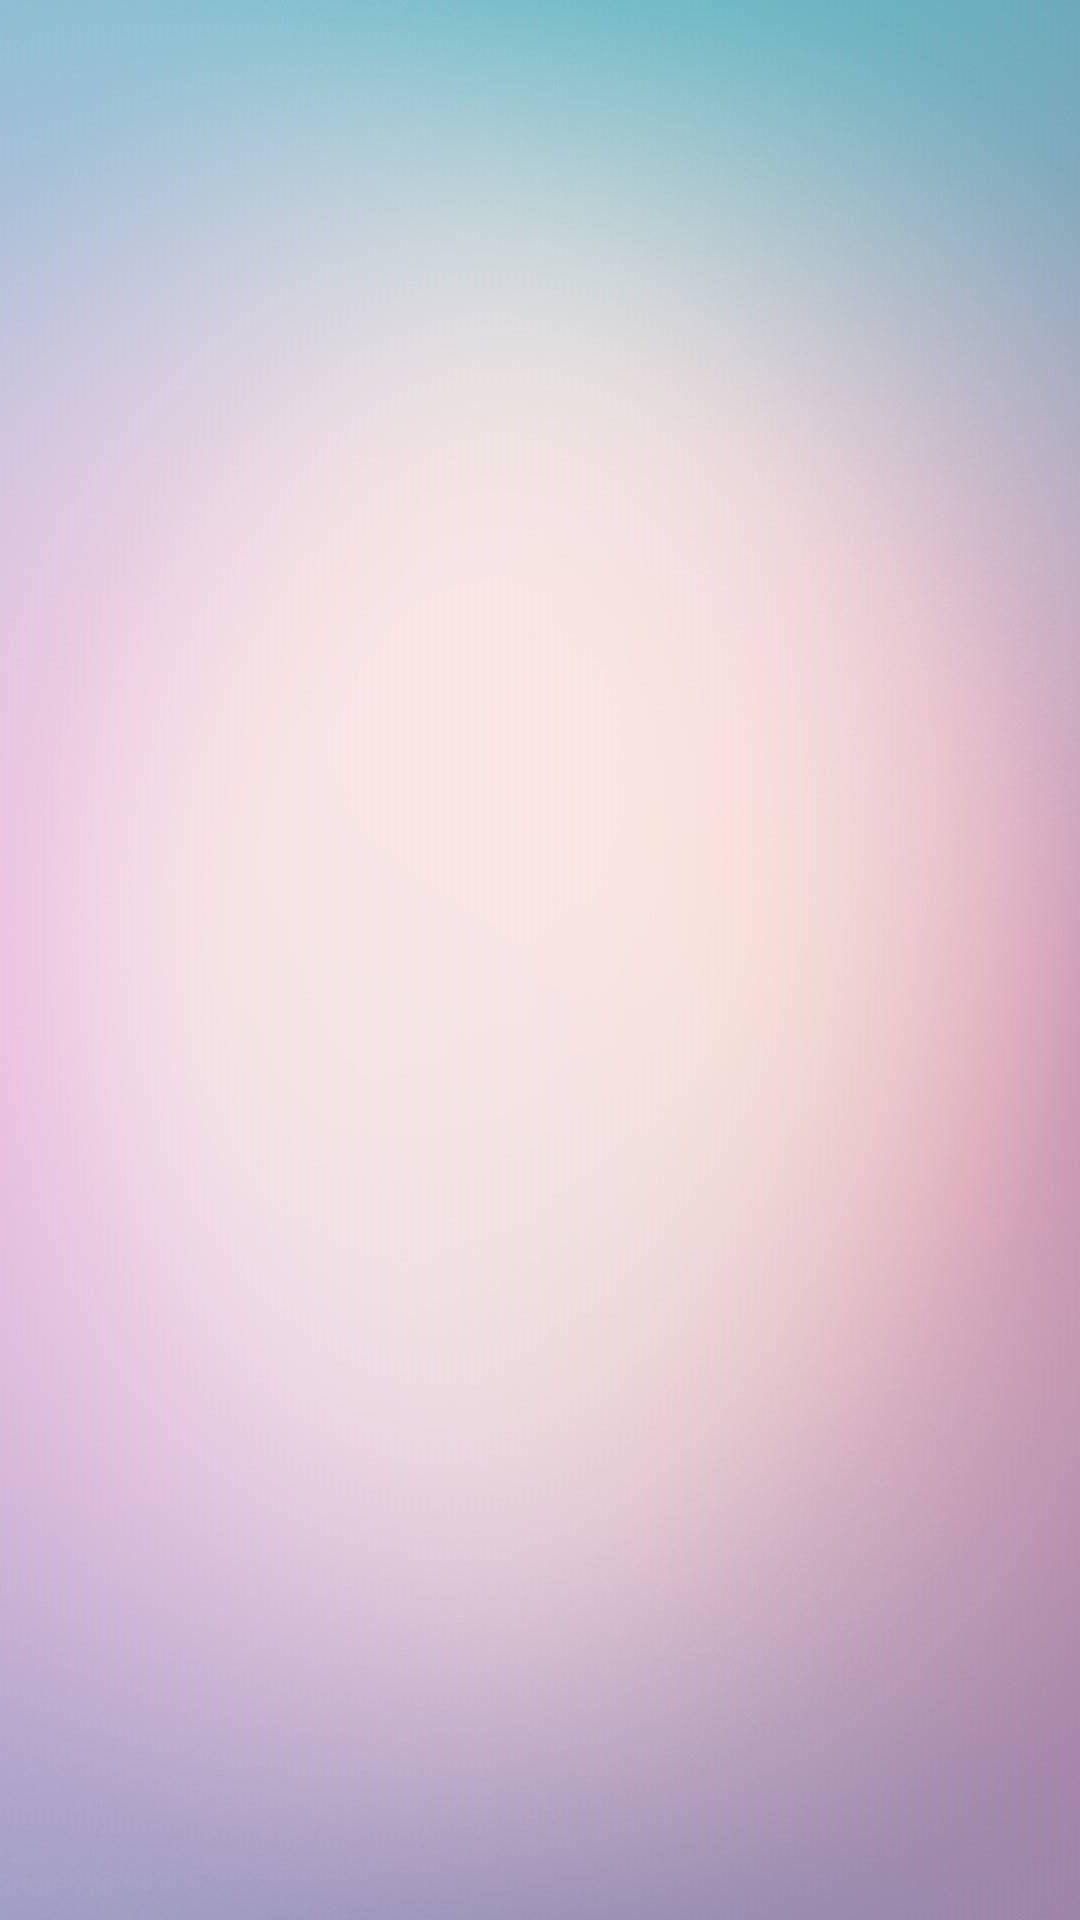 Calming Blurred Background. 18 Calming blurred lights and gradients